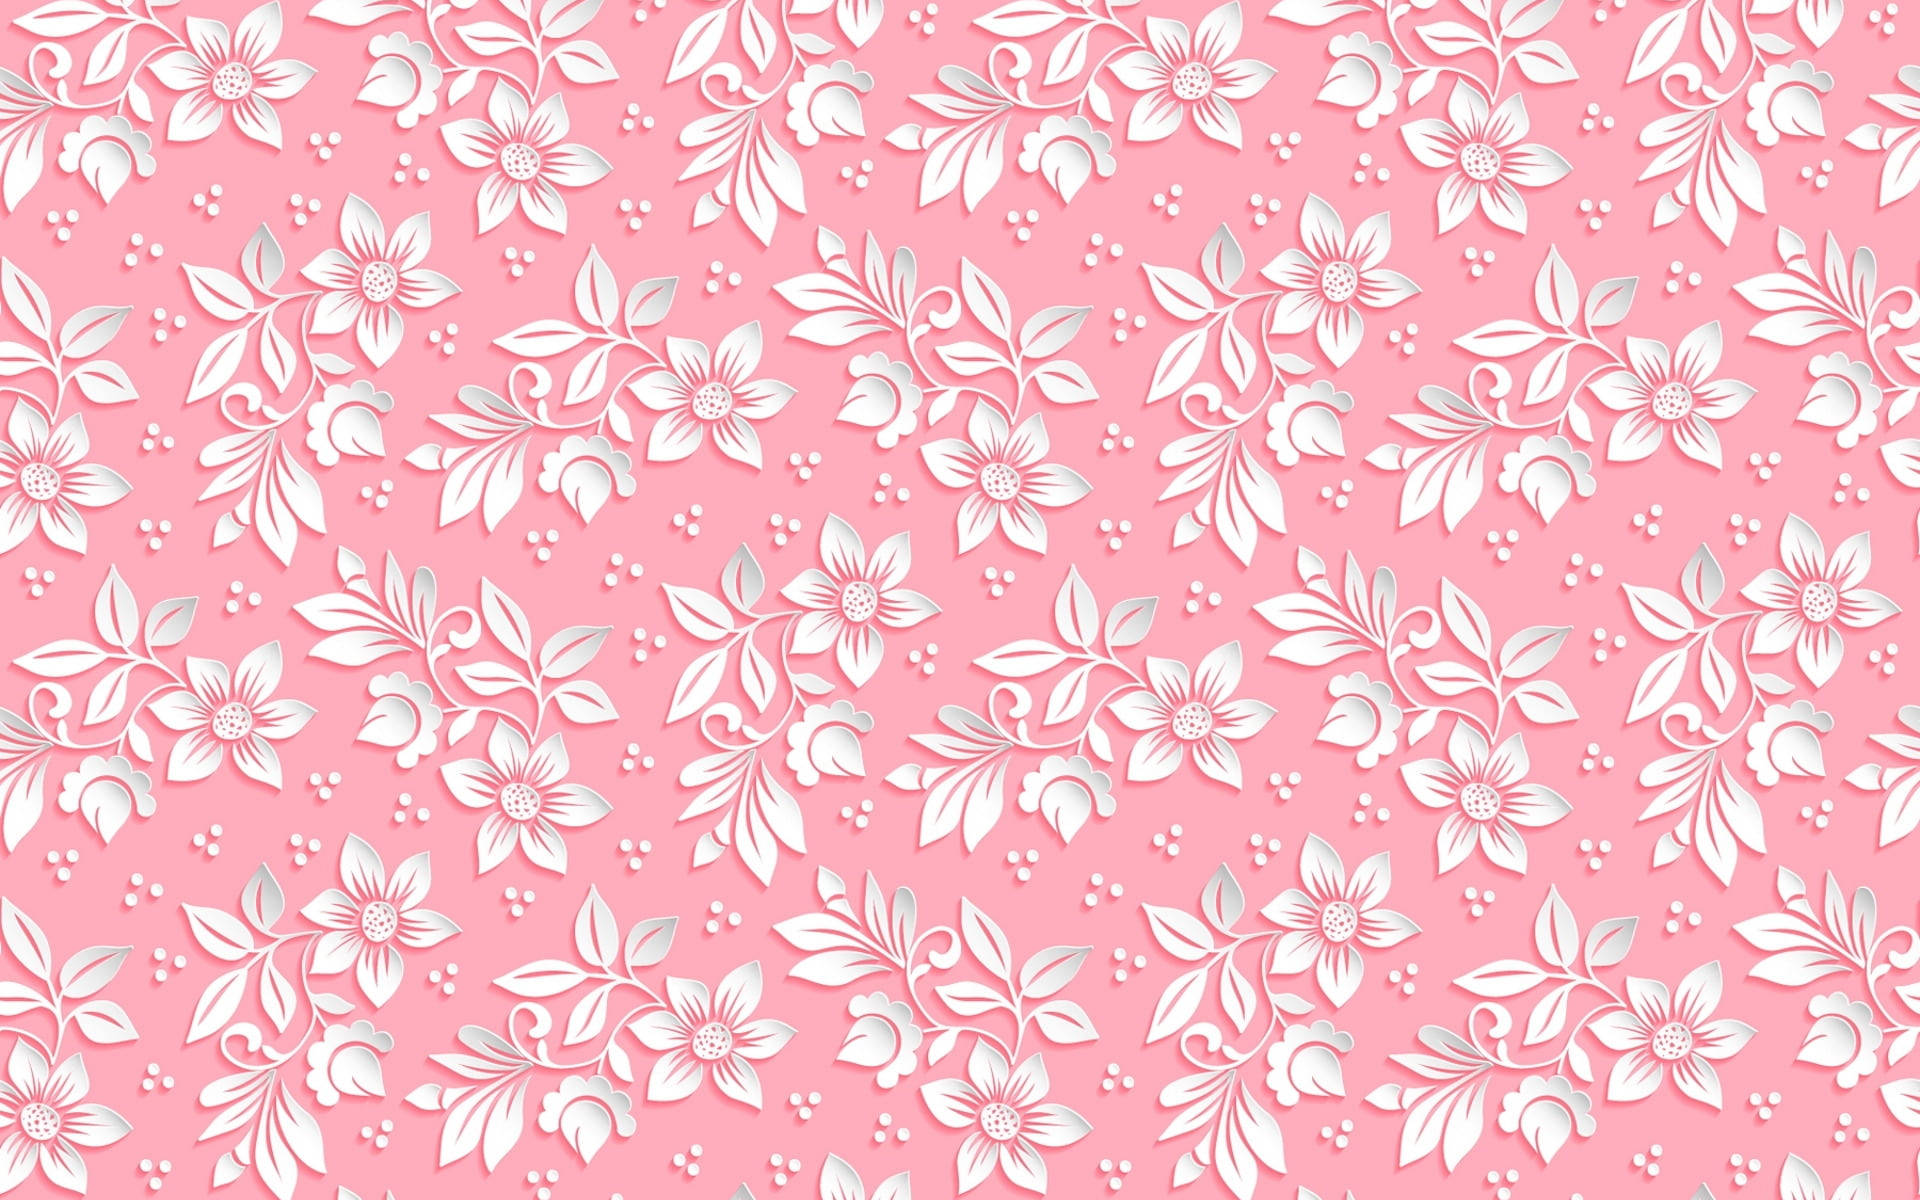 Download Girly White And Pink Florals Wallpaper 